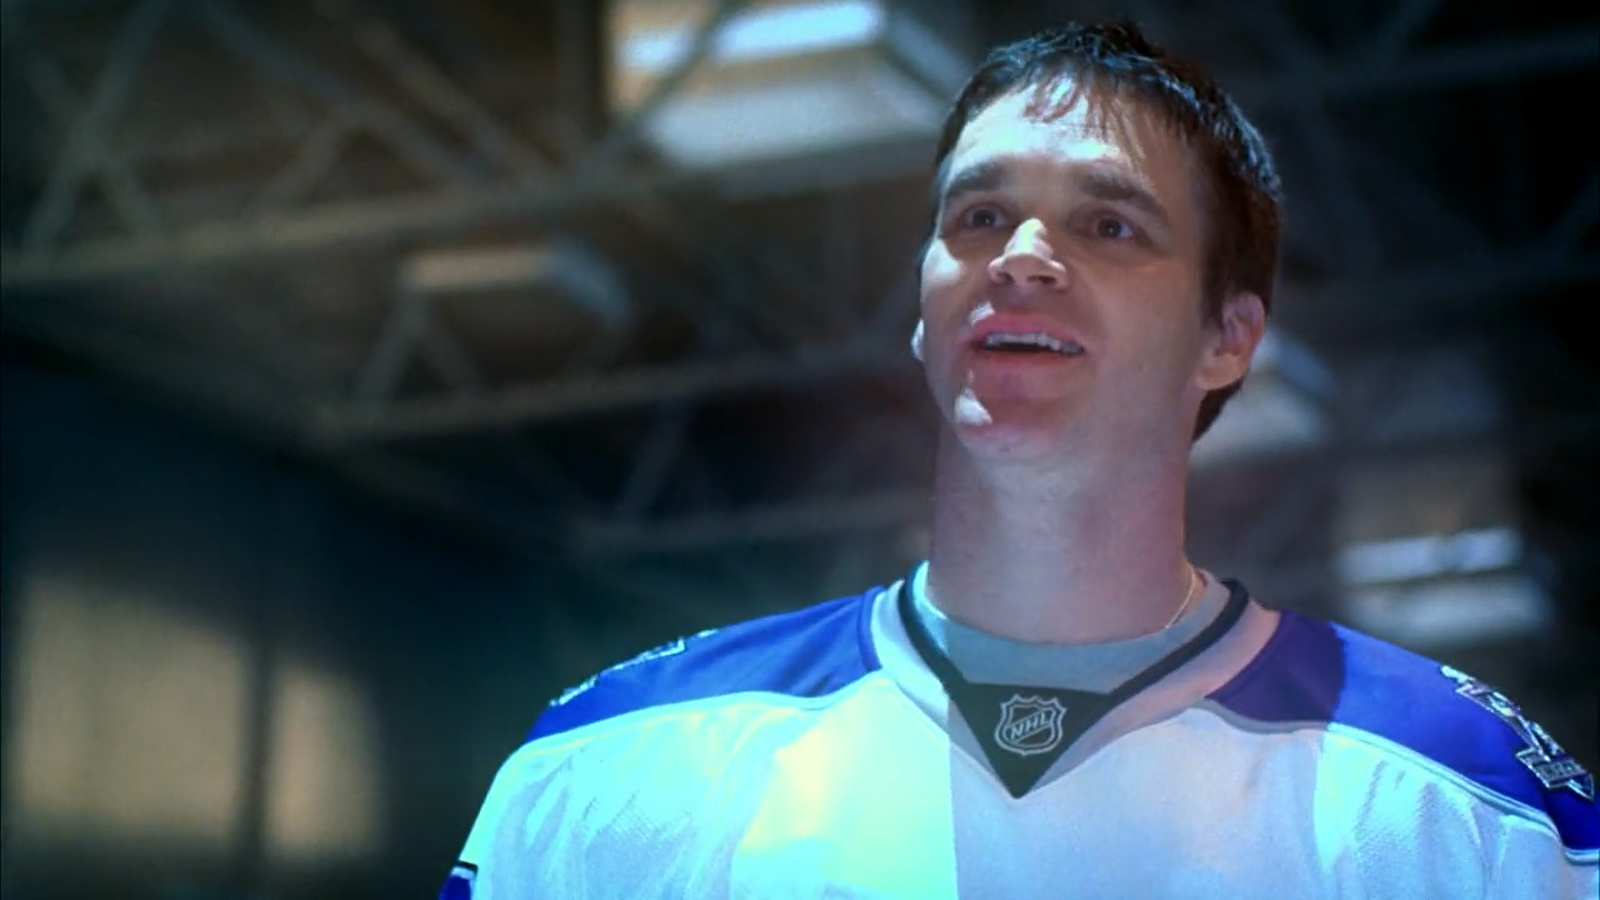 NHL99: Luc Robitaille followed his personal 'Camino' to